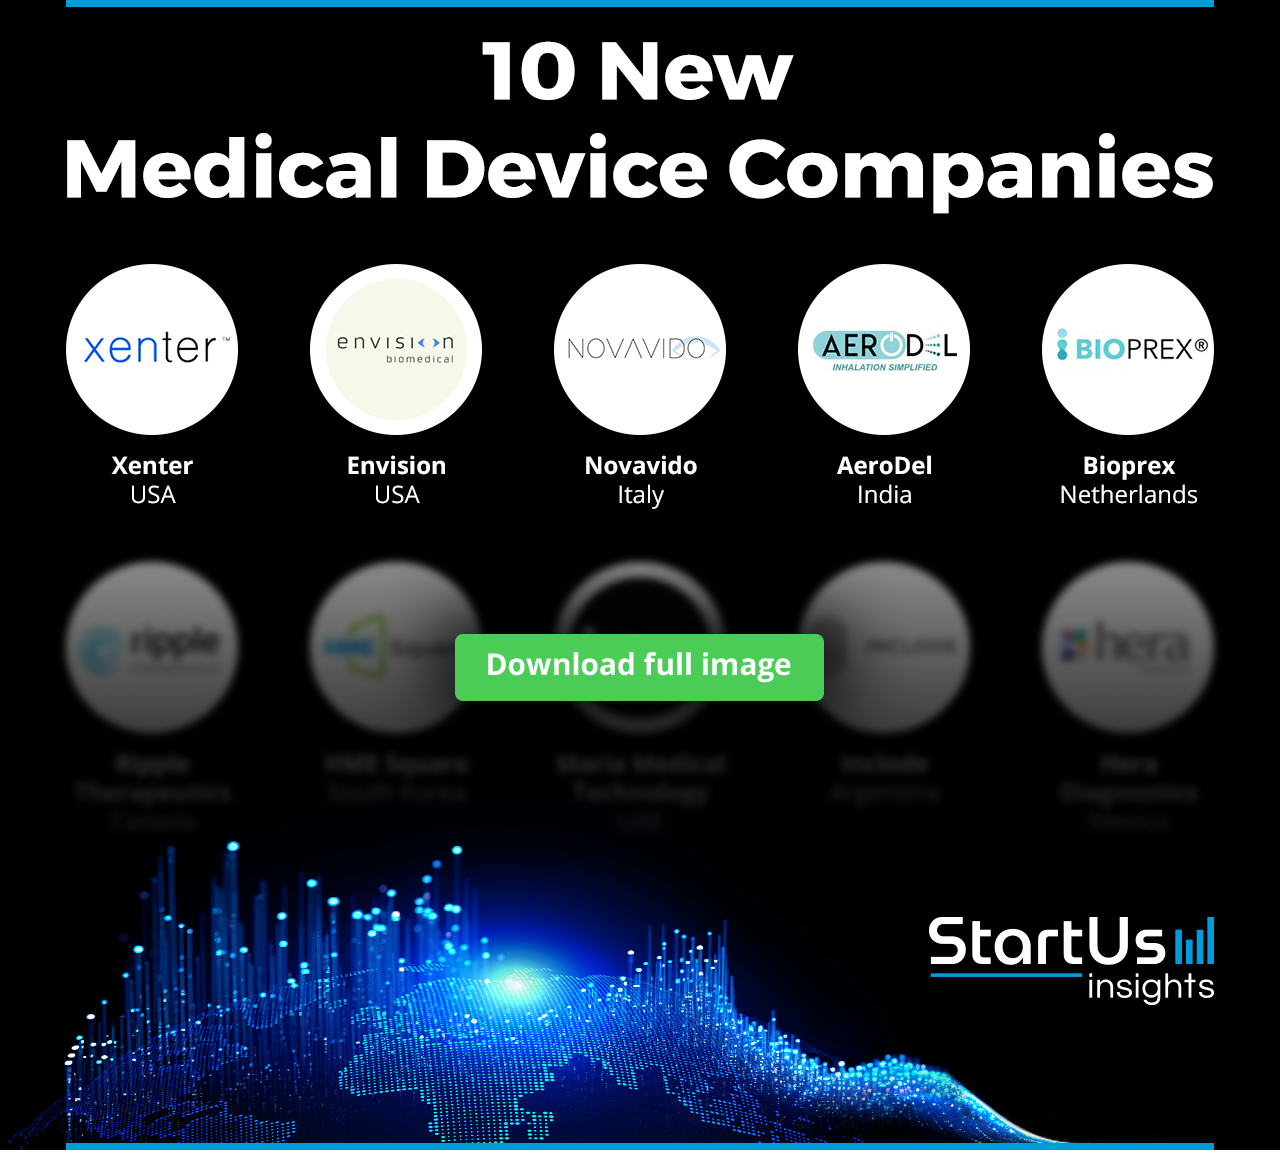 New-Medical-Device-Companies-Logos-Blurred-StartUs-Insights-noresize